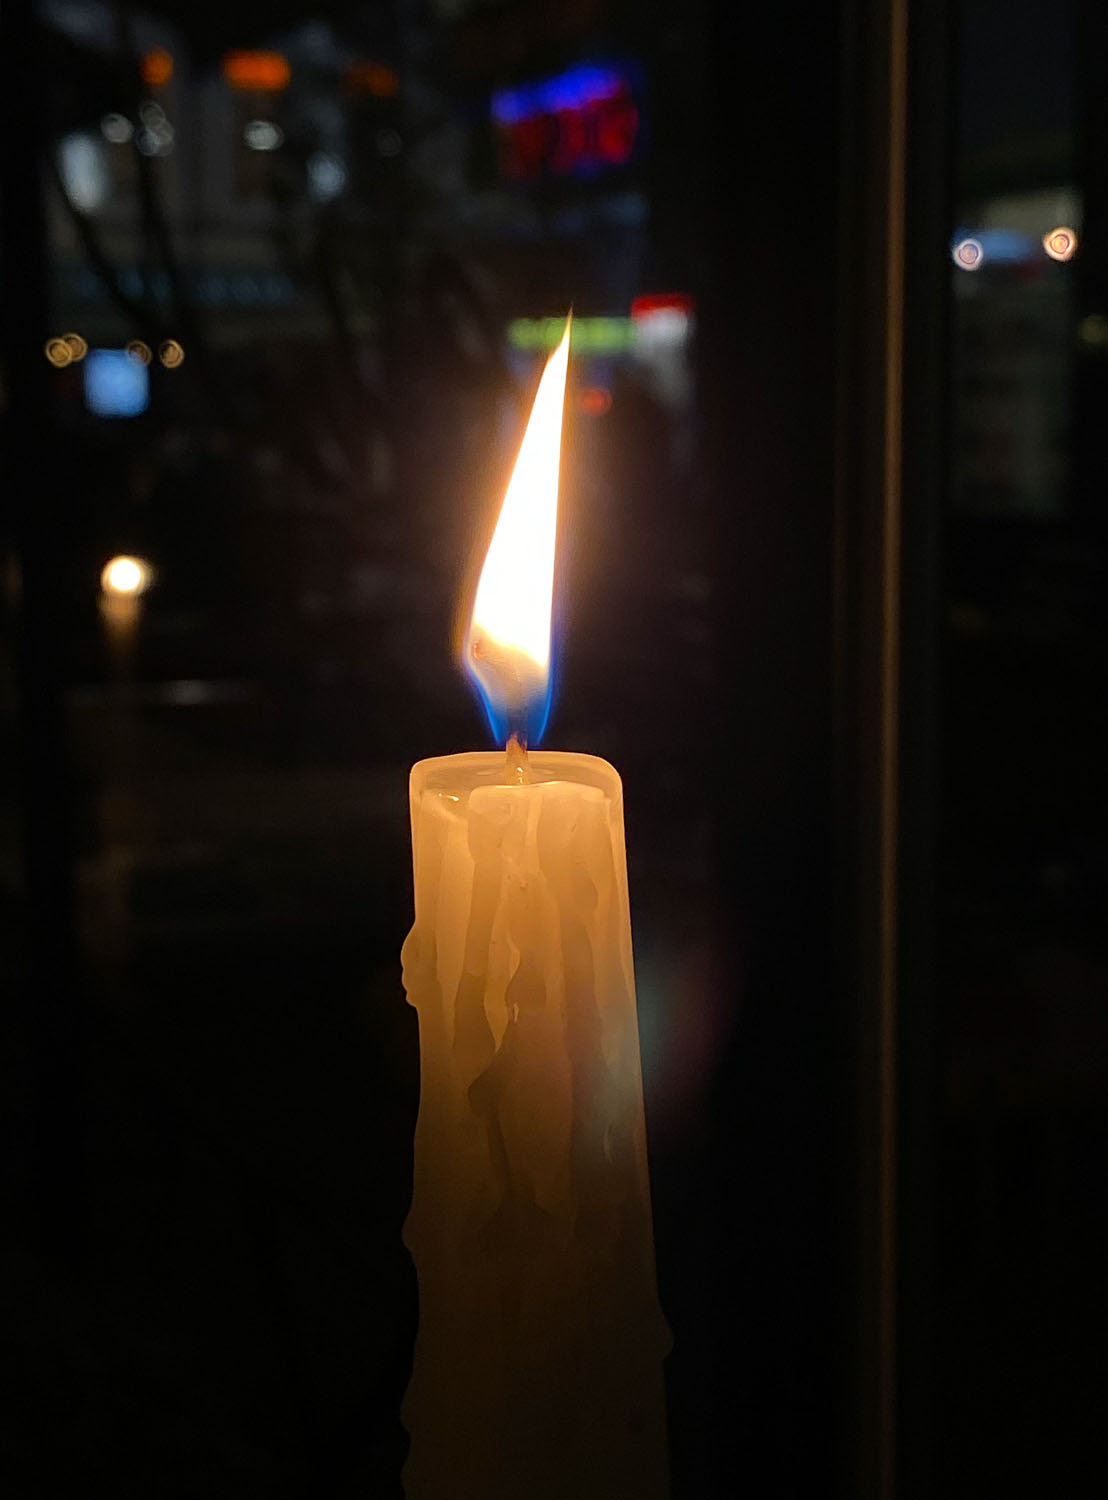 iPhone 11 Pro camera test – candle